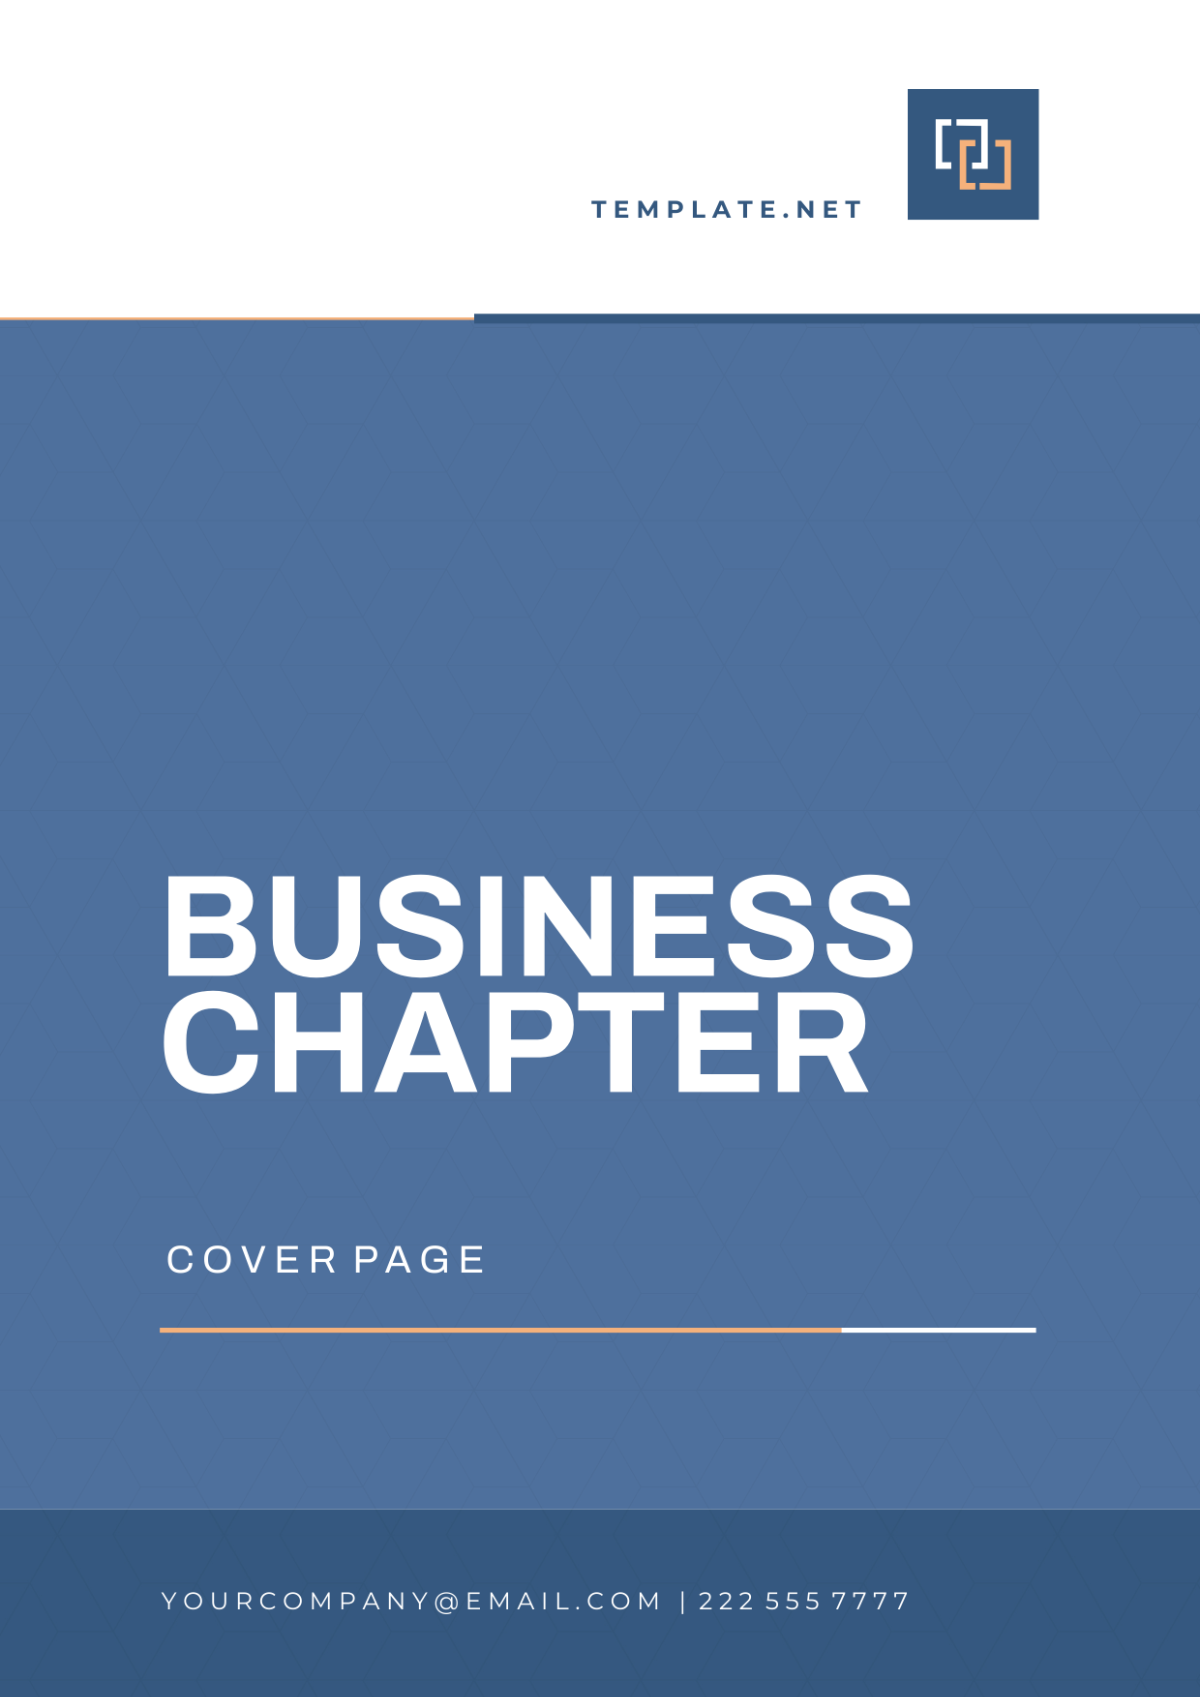 Free Business Chapter Cover Page Template